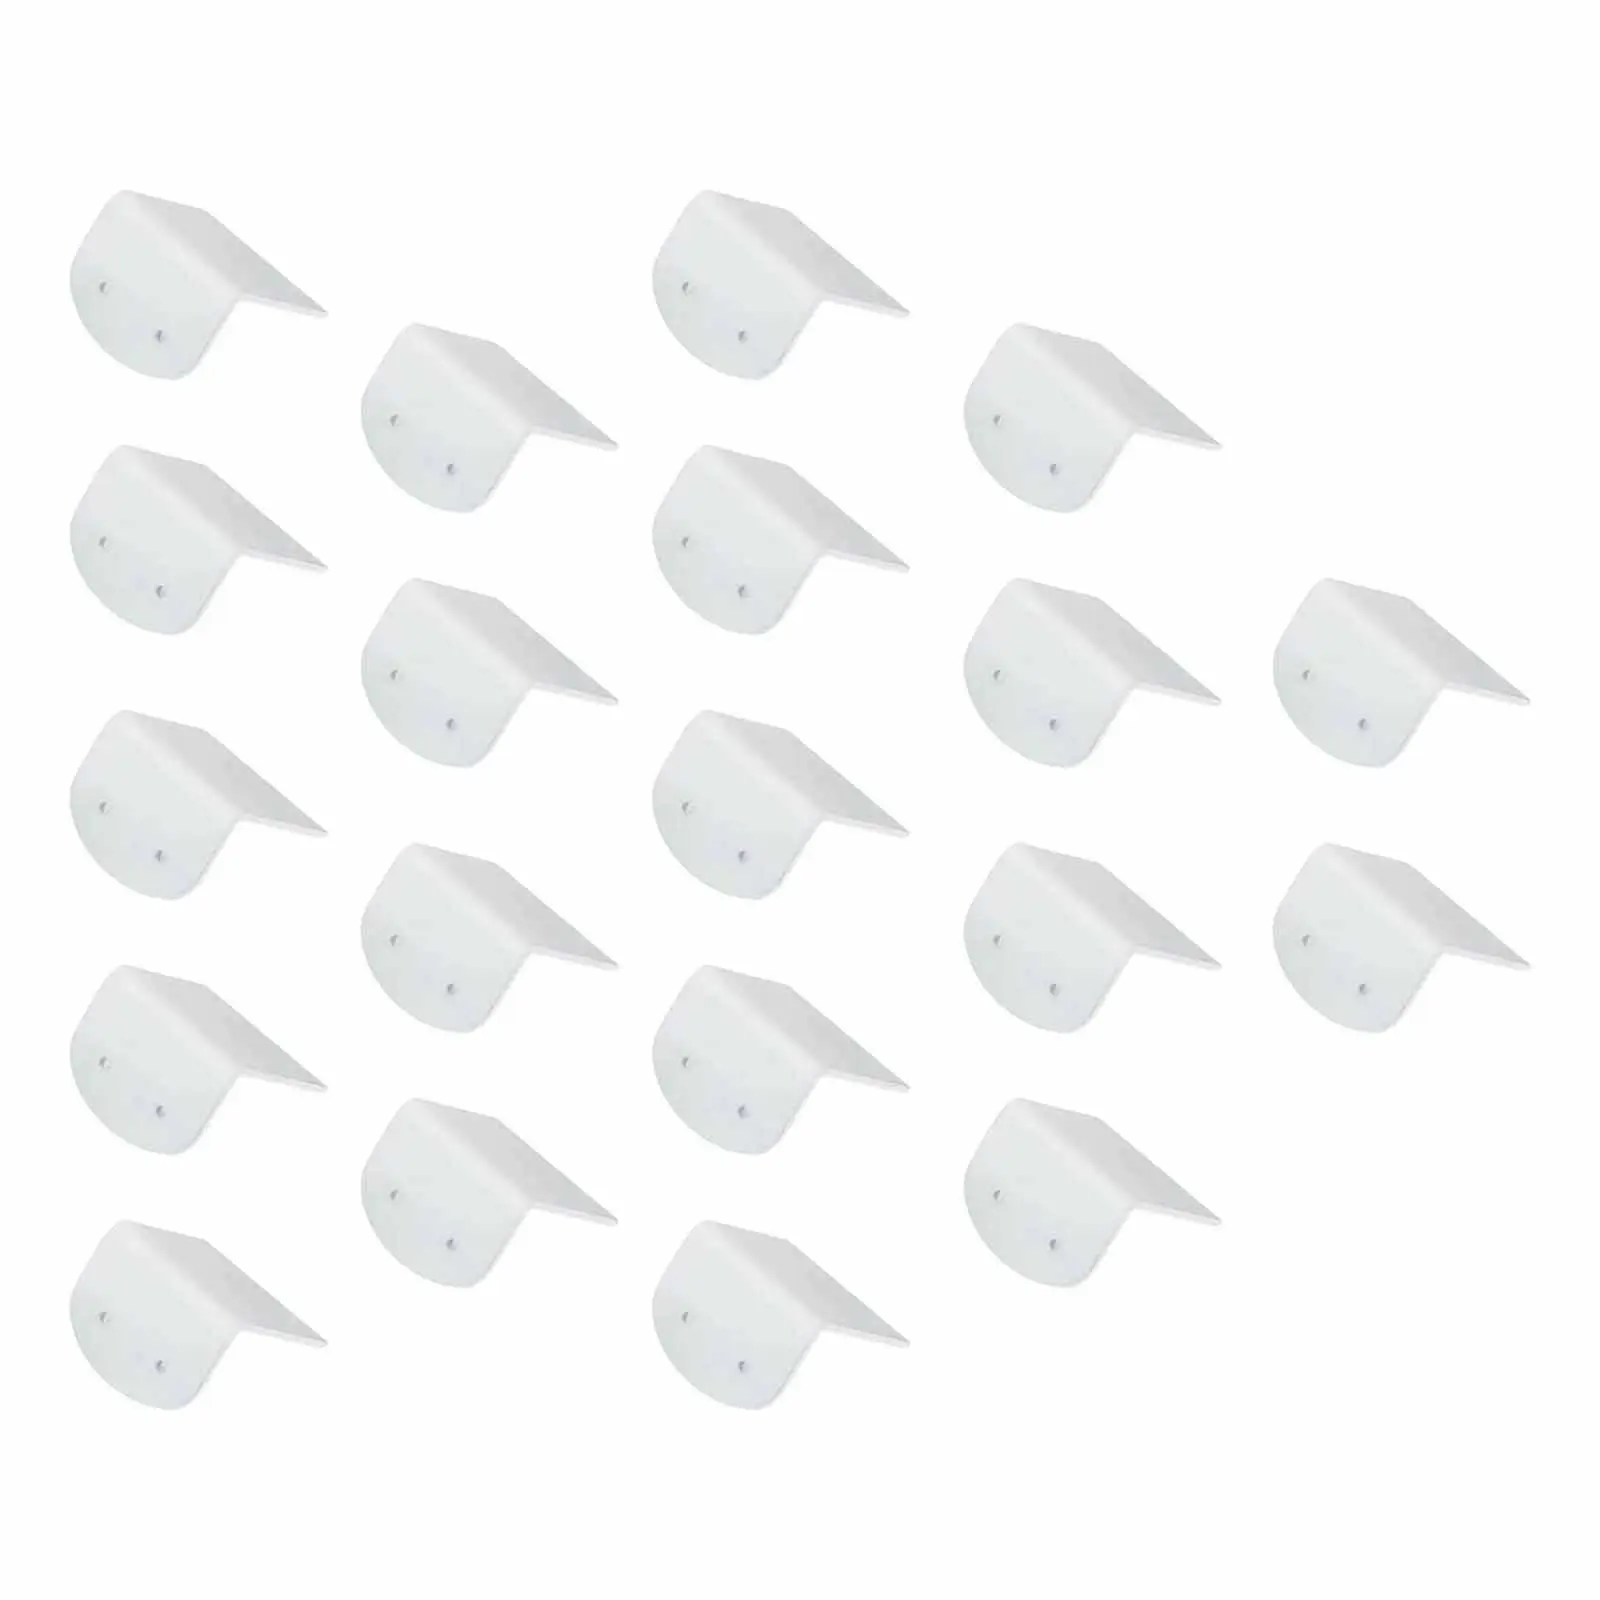 20Pcs Acrylic Earring Cards White Ear Hooks Organizer Durable Ear Loops Display Accessory Lightweight Storage for Shop Showcase